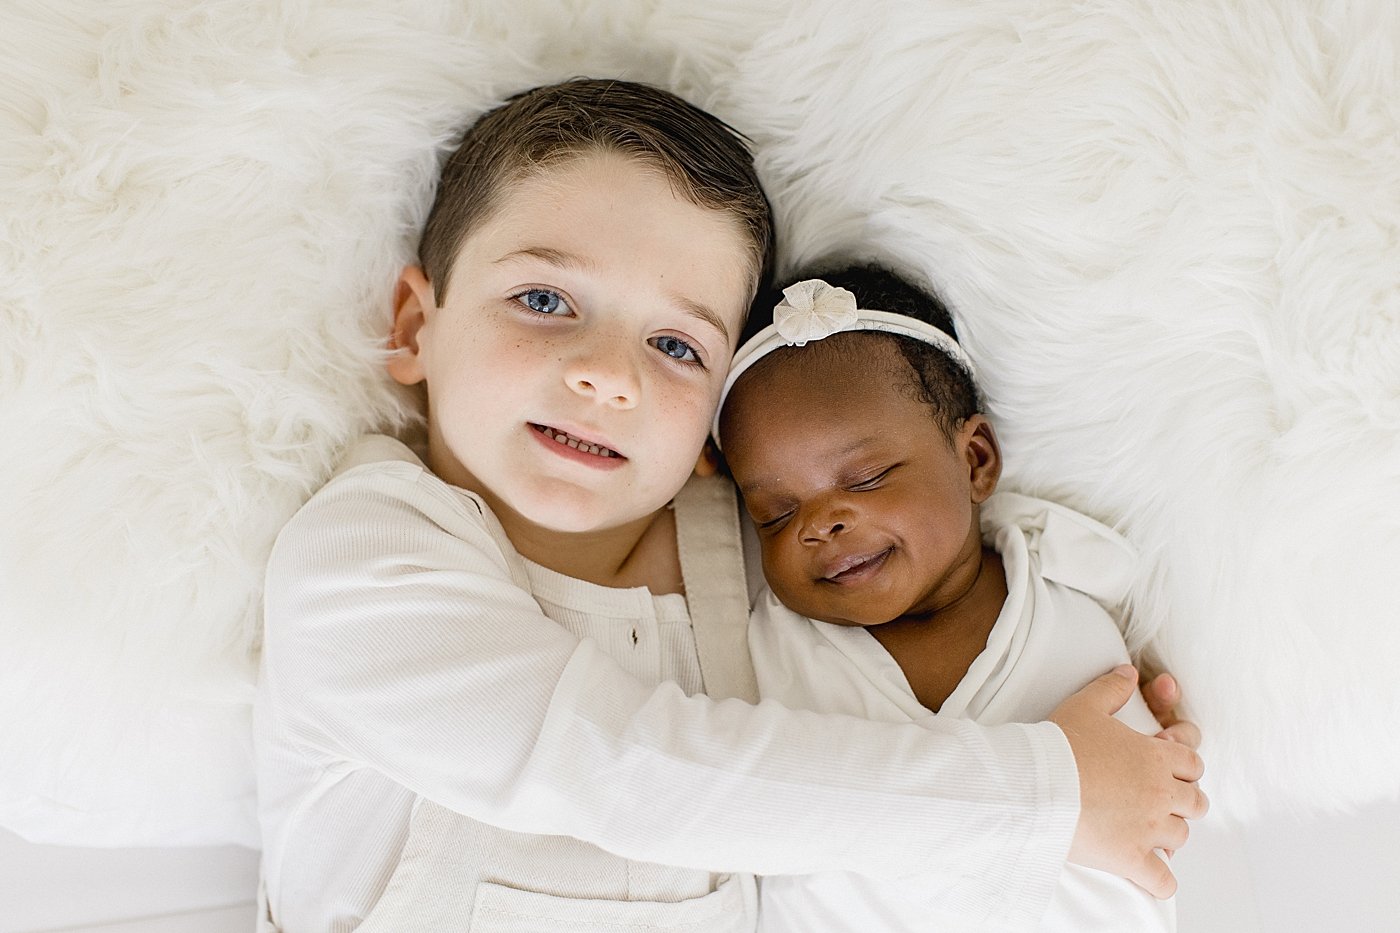 Adorable Siblings in Newborn Studio Session | Ambre Williams Photography